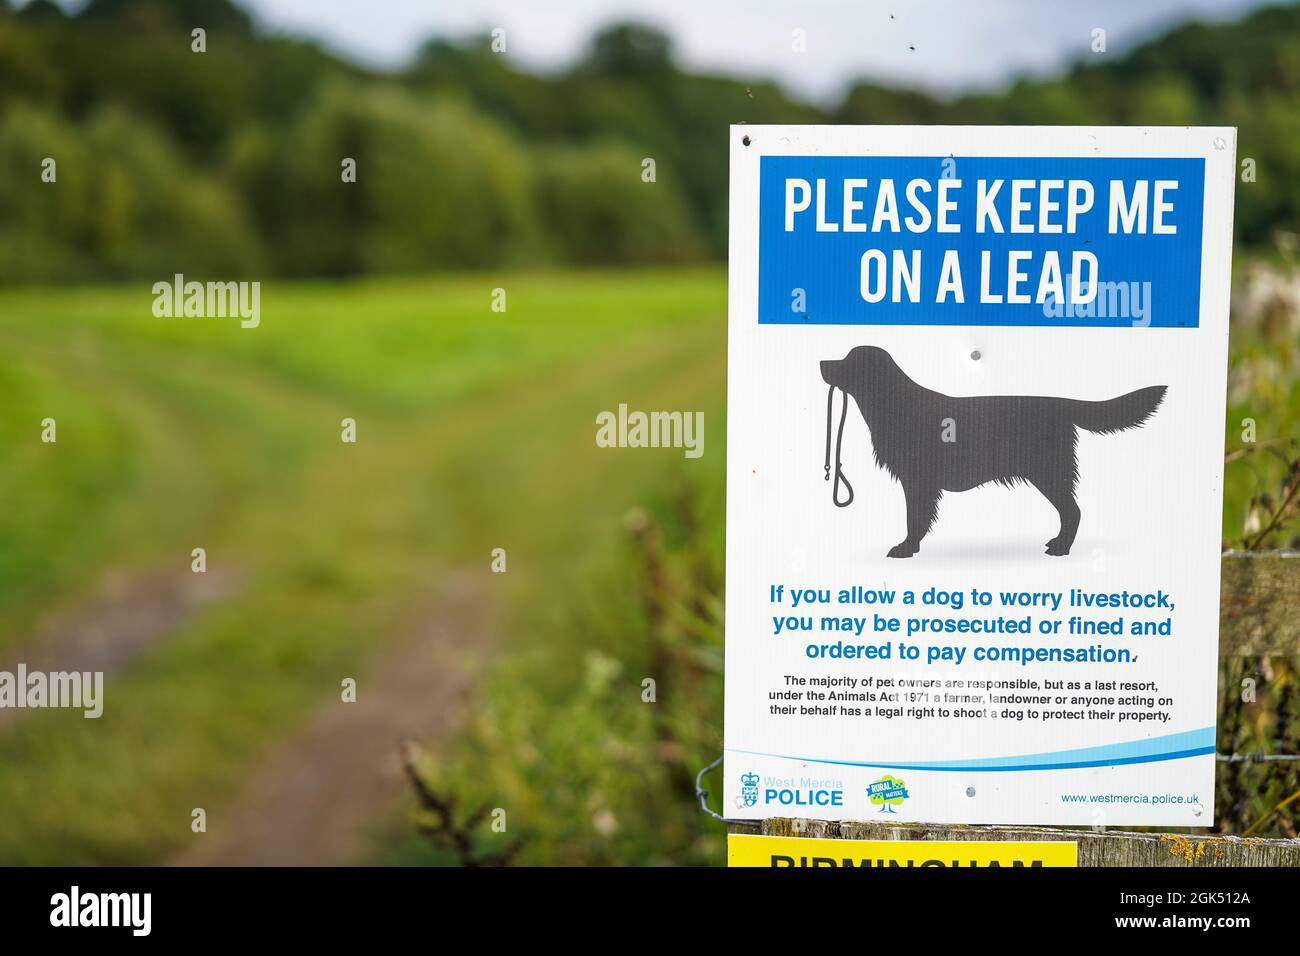 Polite police notice, sign to dog walkers: 'Please Keep Me On A Lead' in rural, UK countryside setting. Stock Photo